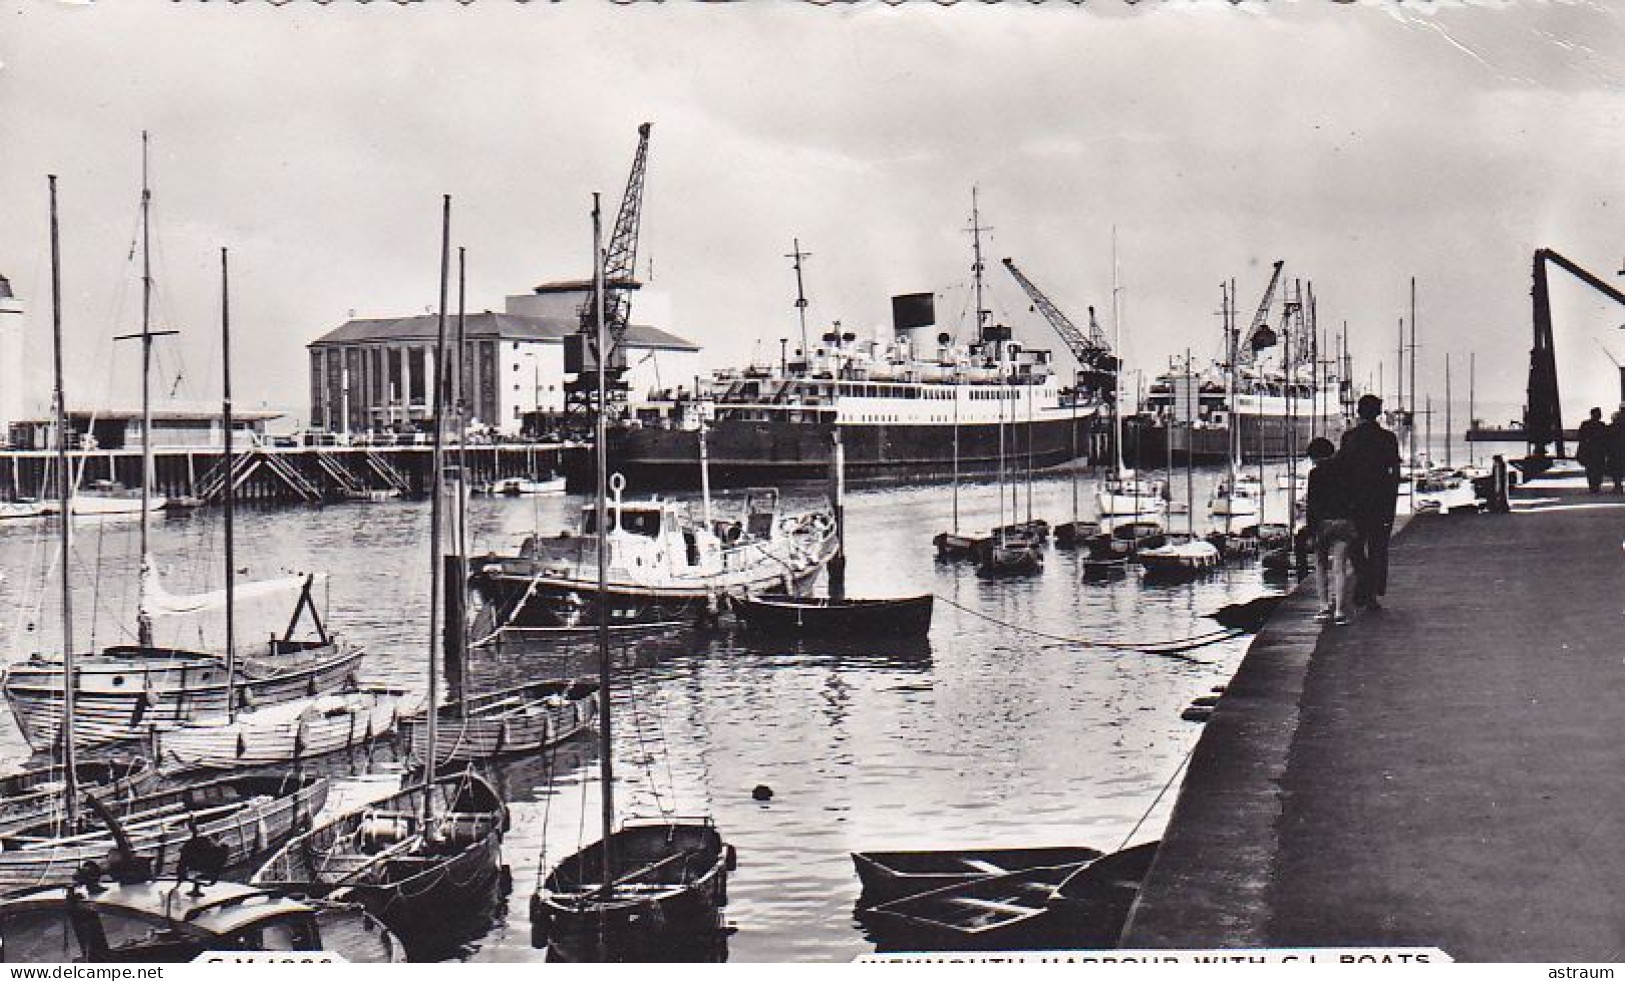 Cpa-ang- Weymouth -- Harbour With C.I.boats -c.m. 1026 - Weymouth